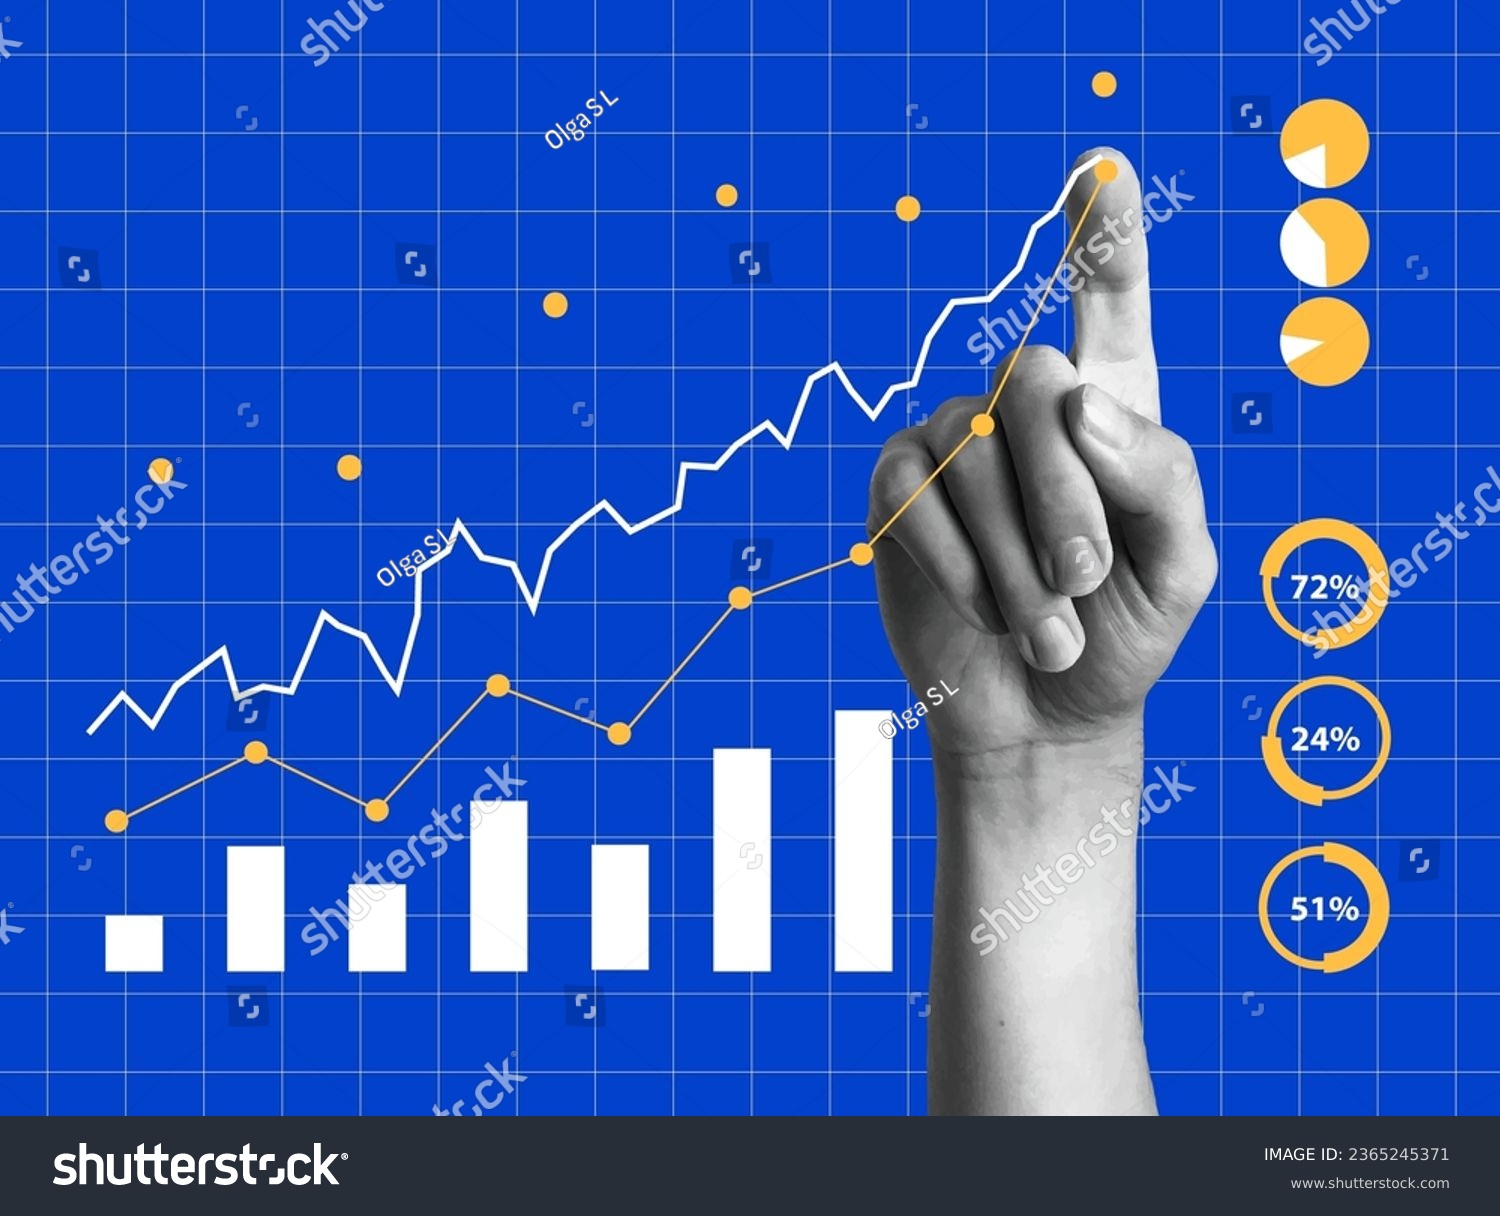 SVG of Minimalist collage with hands. Finance-themed banner. Digital finance business data graph showing technology of investment strategy for perceptive financial business decision svg